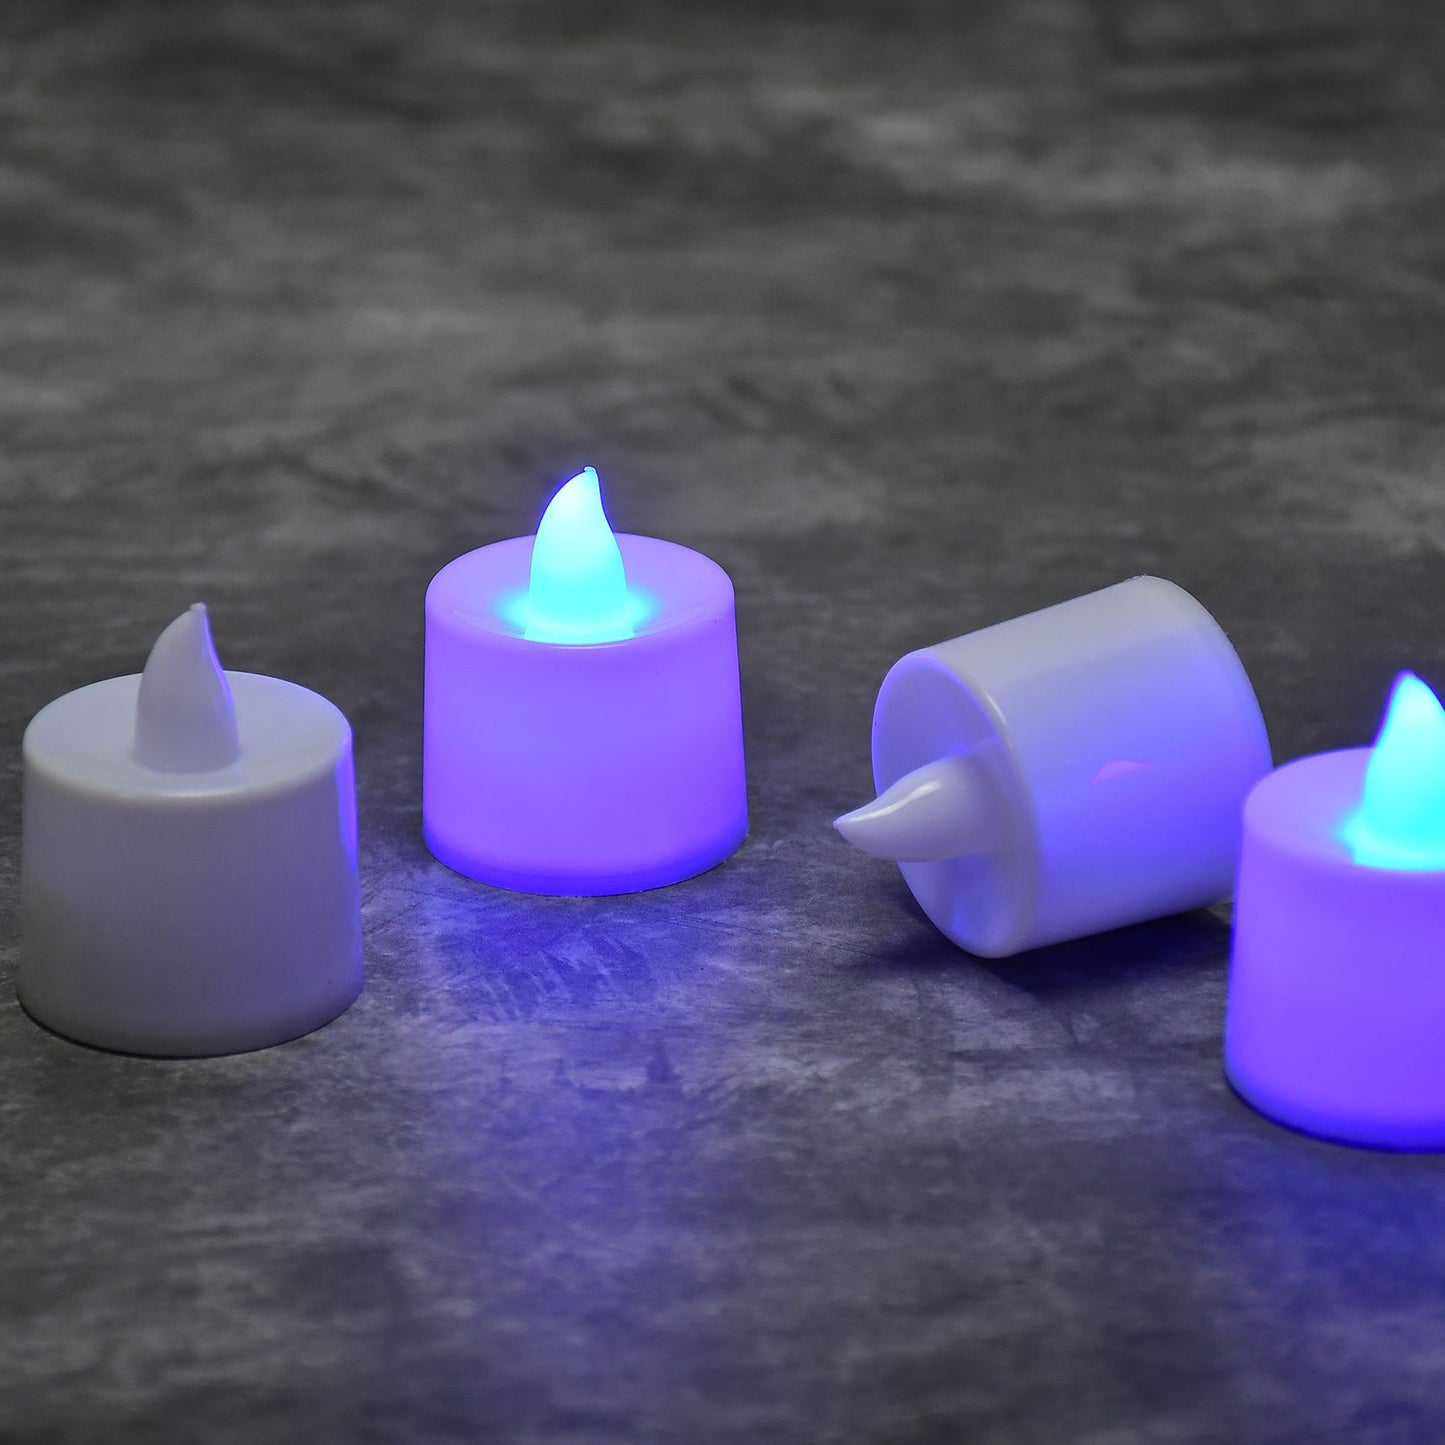 6634 Blue Flameless LED Tealights, Smokeless Plastic Decorative Candles - Led Tea Light Candle For Home Decoration (Pack Of 24) 